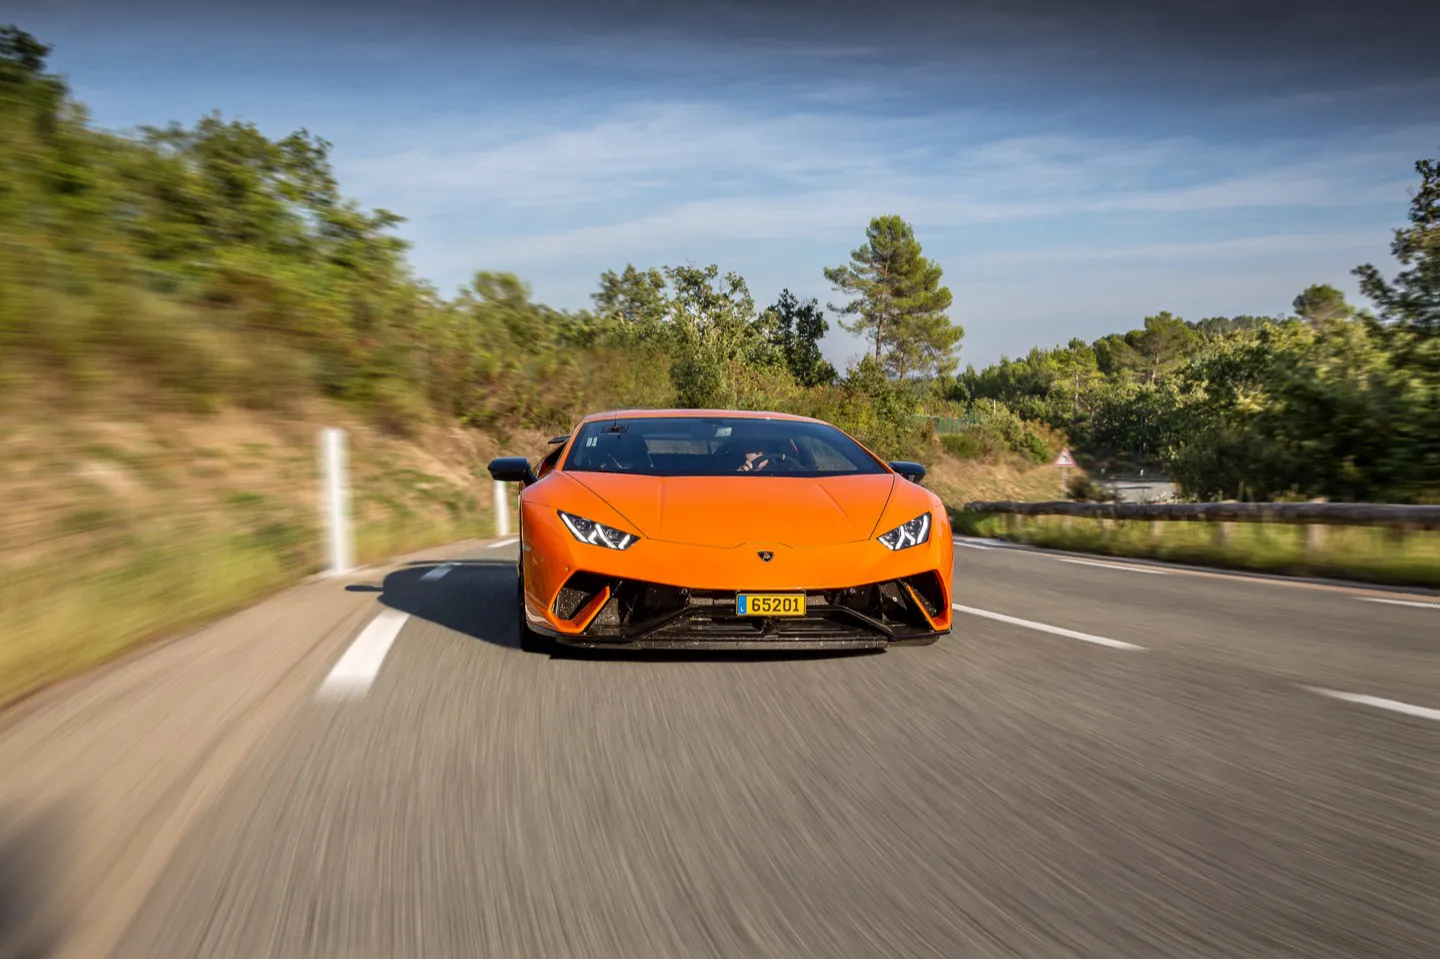 Drive your favourite supercar on a five-star stay and drive package with The Luxury Collection